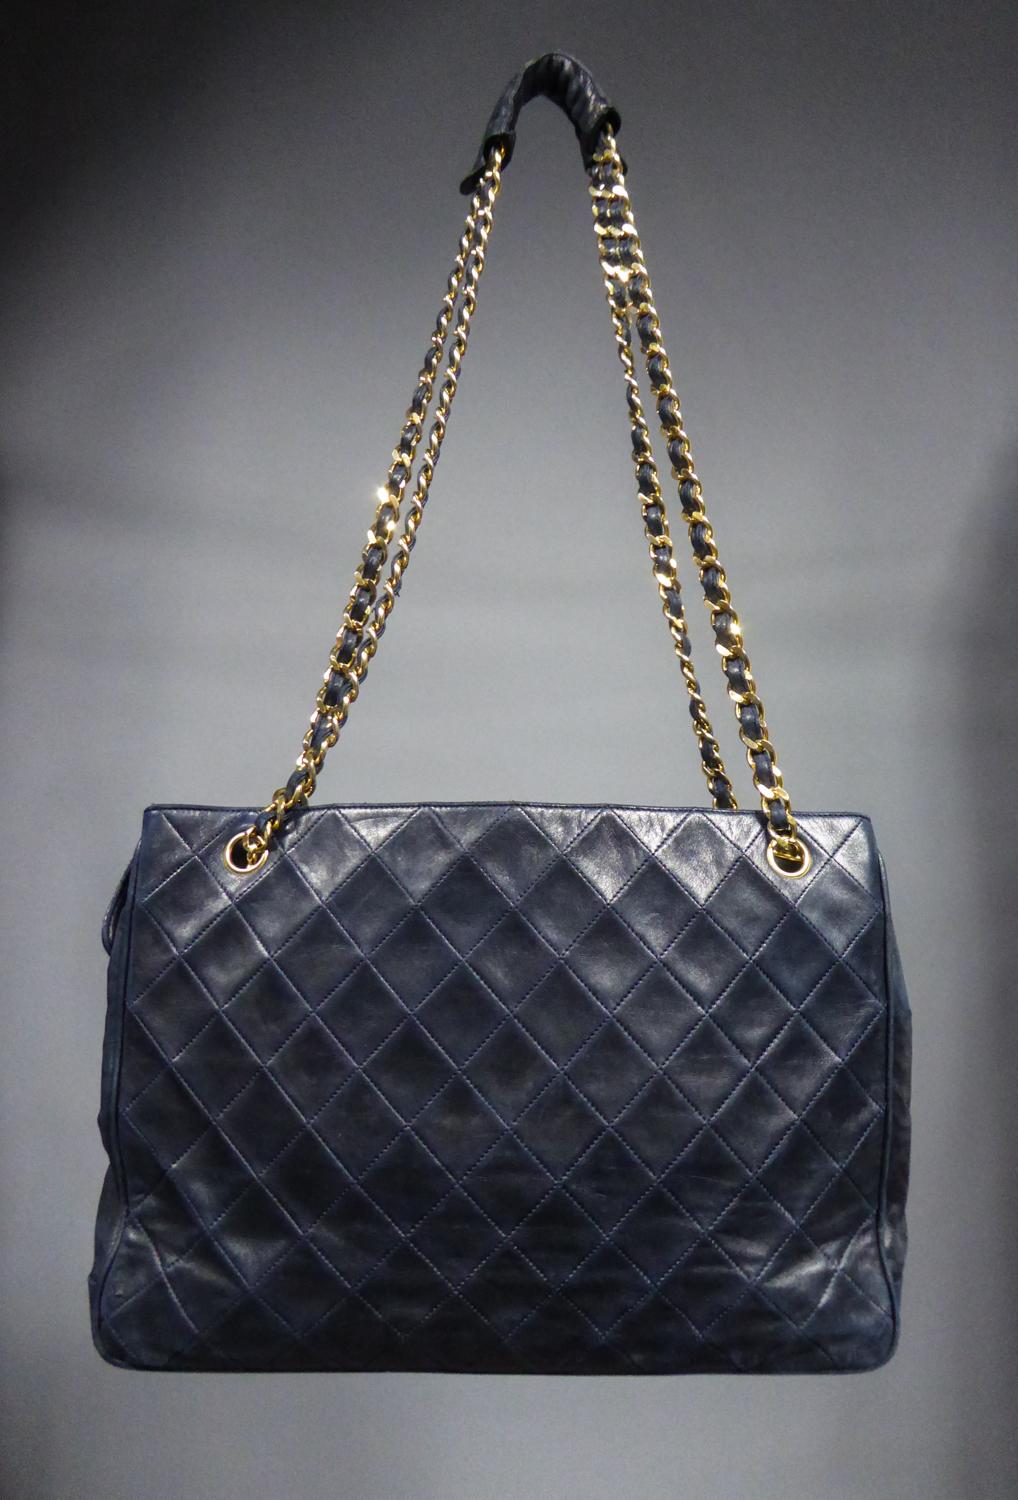 A Chanel Cabas or Grand Shopping Bag in Navy Quilted Leather Circa 2000 2